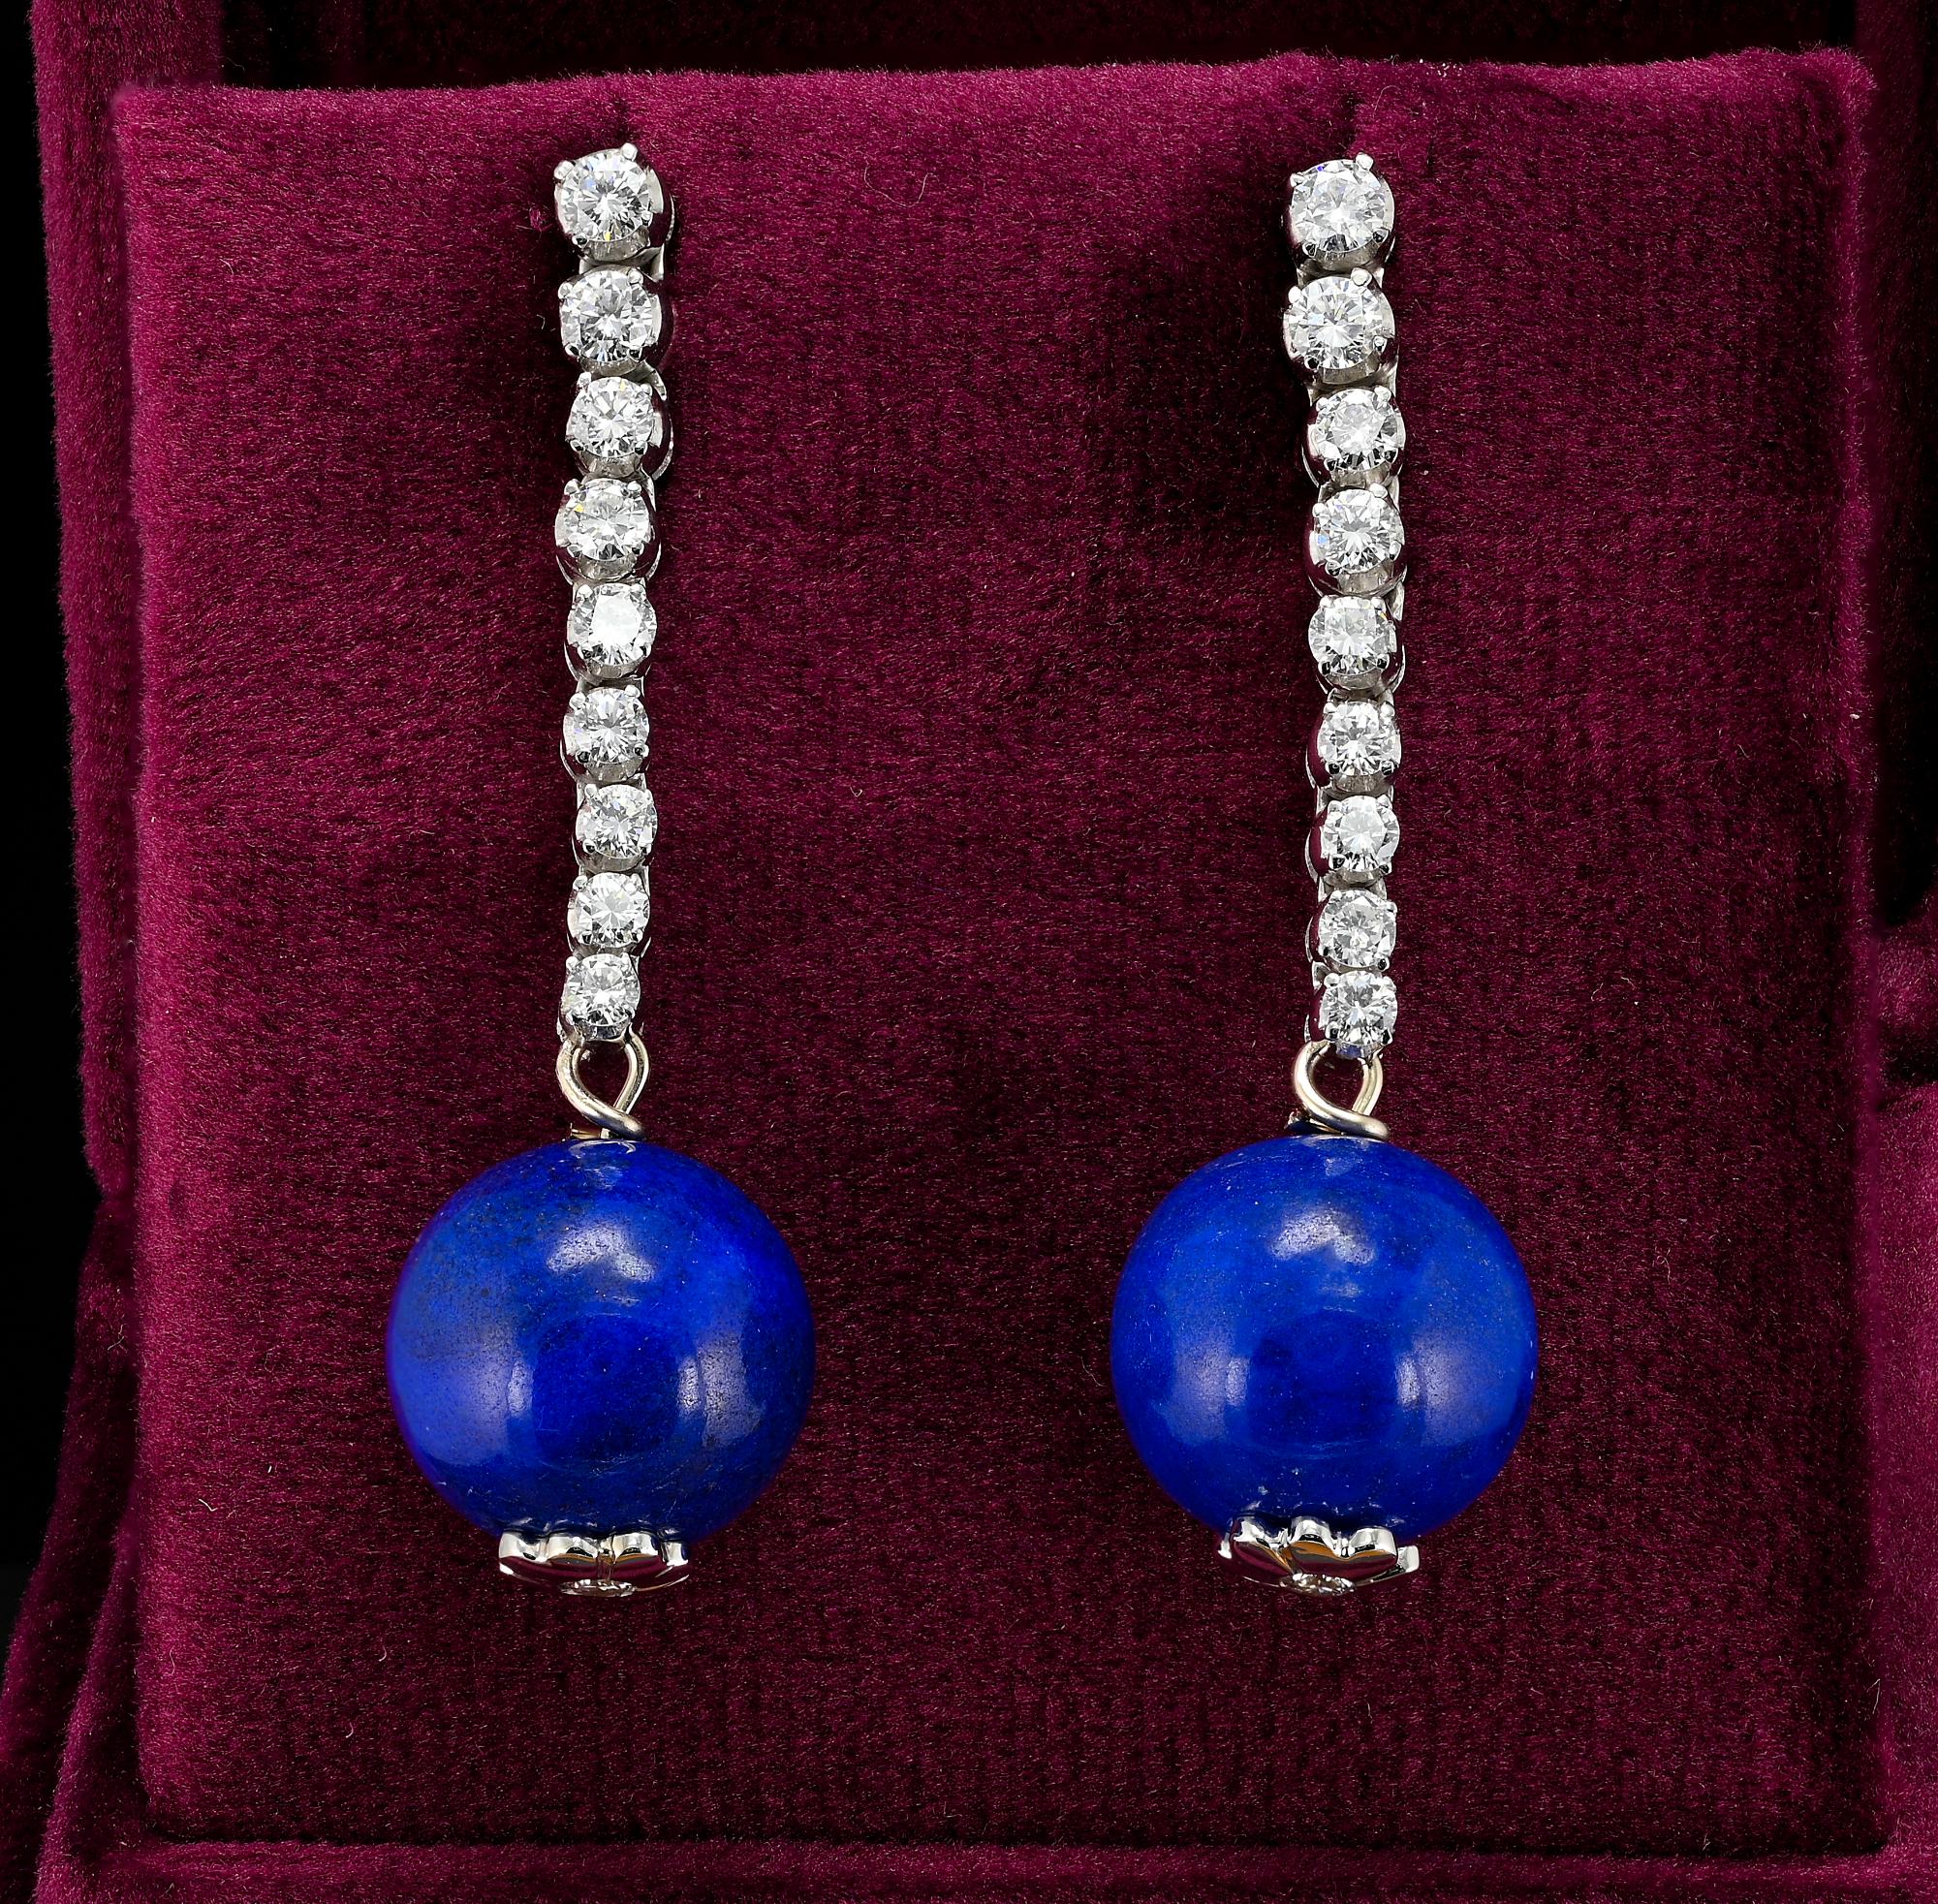 These lovely estate long drop earrings drop are 1980 circa
Classy in style they sway and swing with lovely movement showing amazing sparkle and gorgeous Royal Blue color
Hand crafted of solid 18 KT white gold with a long Diamond line leading to an